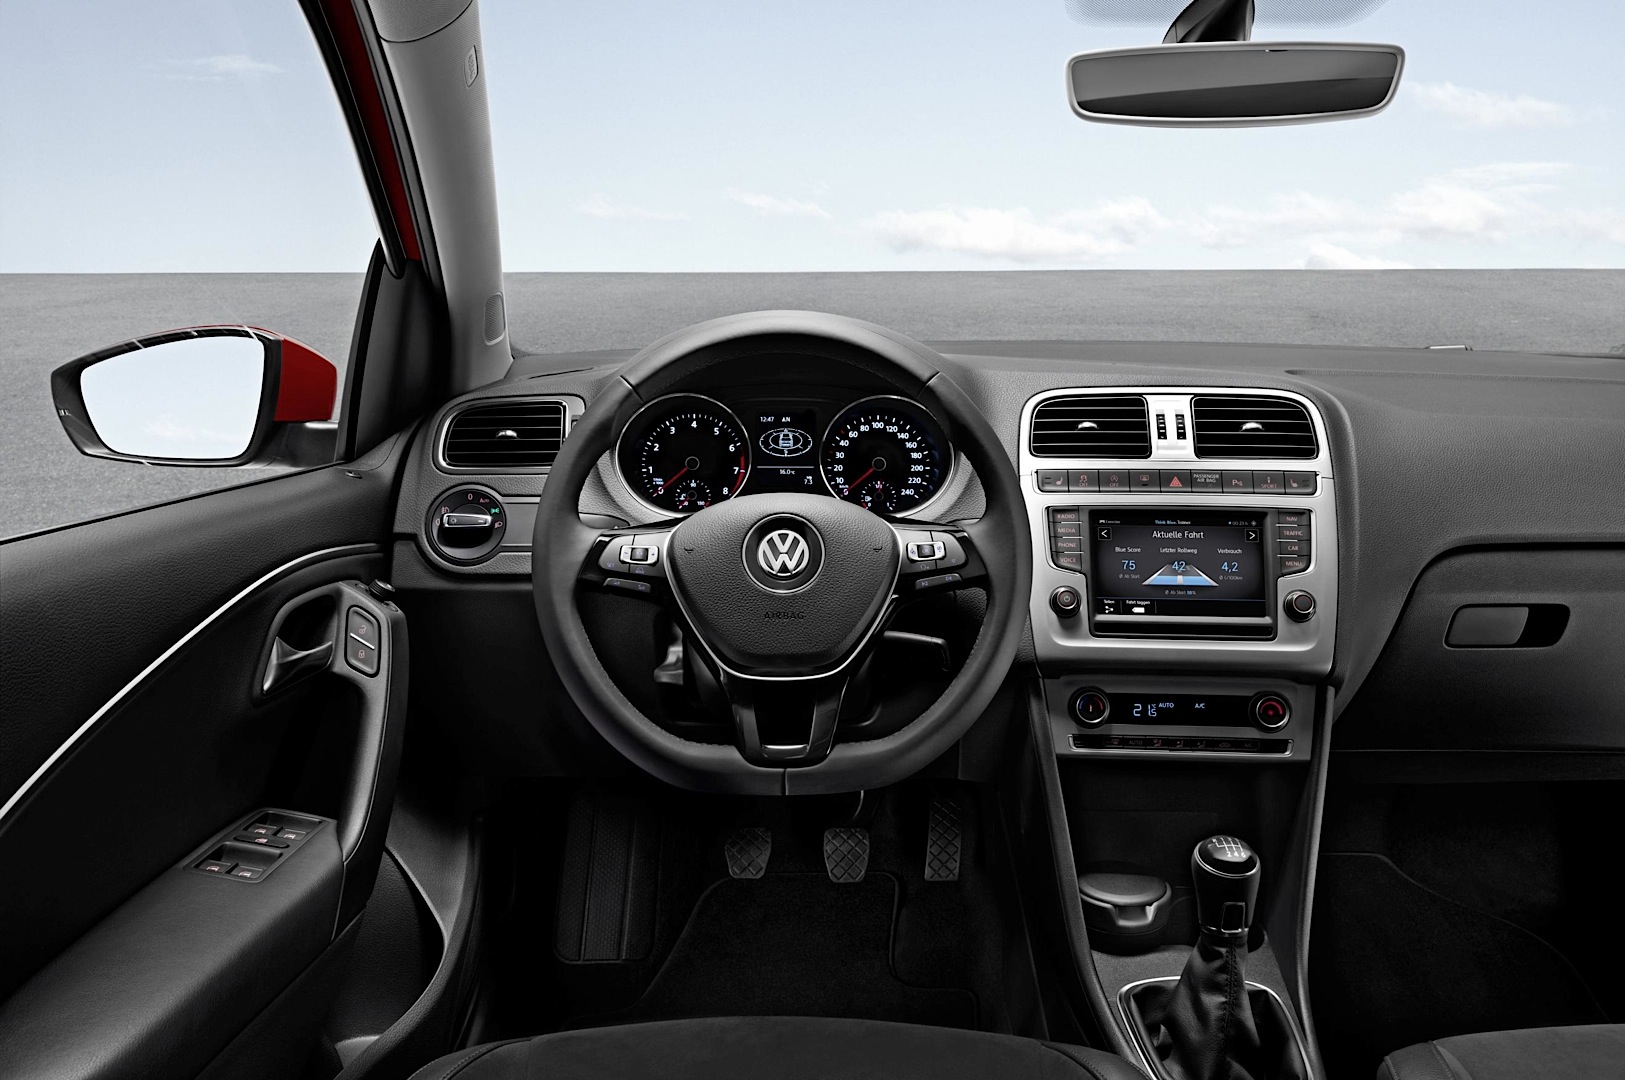 2014 Volkswagen Polo Facelift Interior and Updated Tech